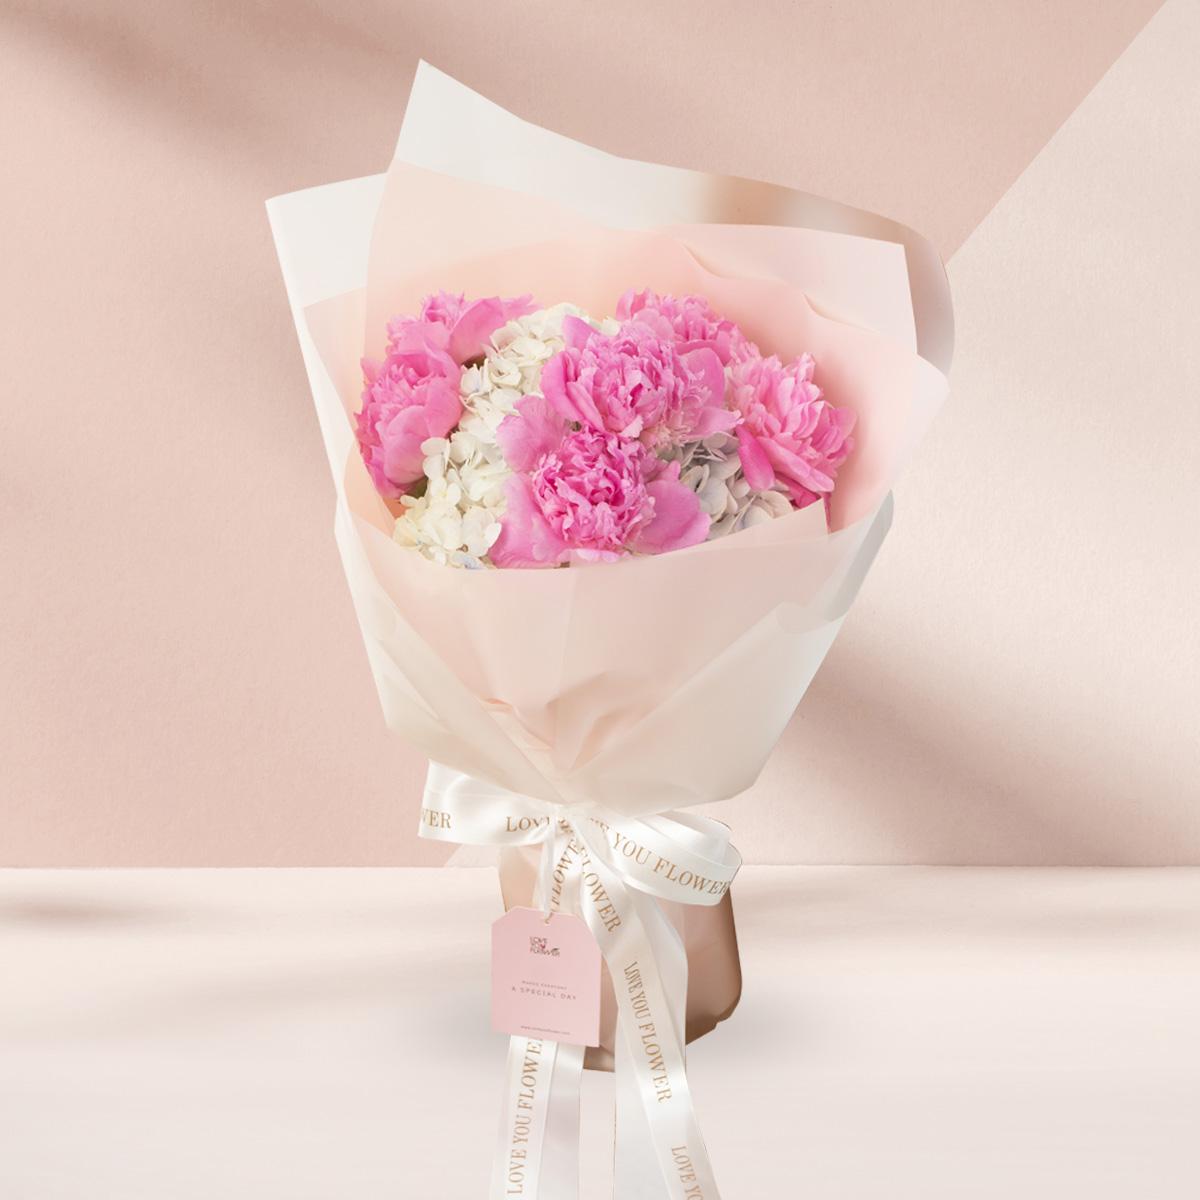 A339 Bouquet of 6 pink peonies, 2 light blue hydrangeas wrapped in Cotton Candy paper with gold and white ribbons.